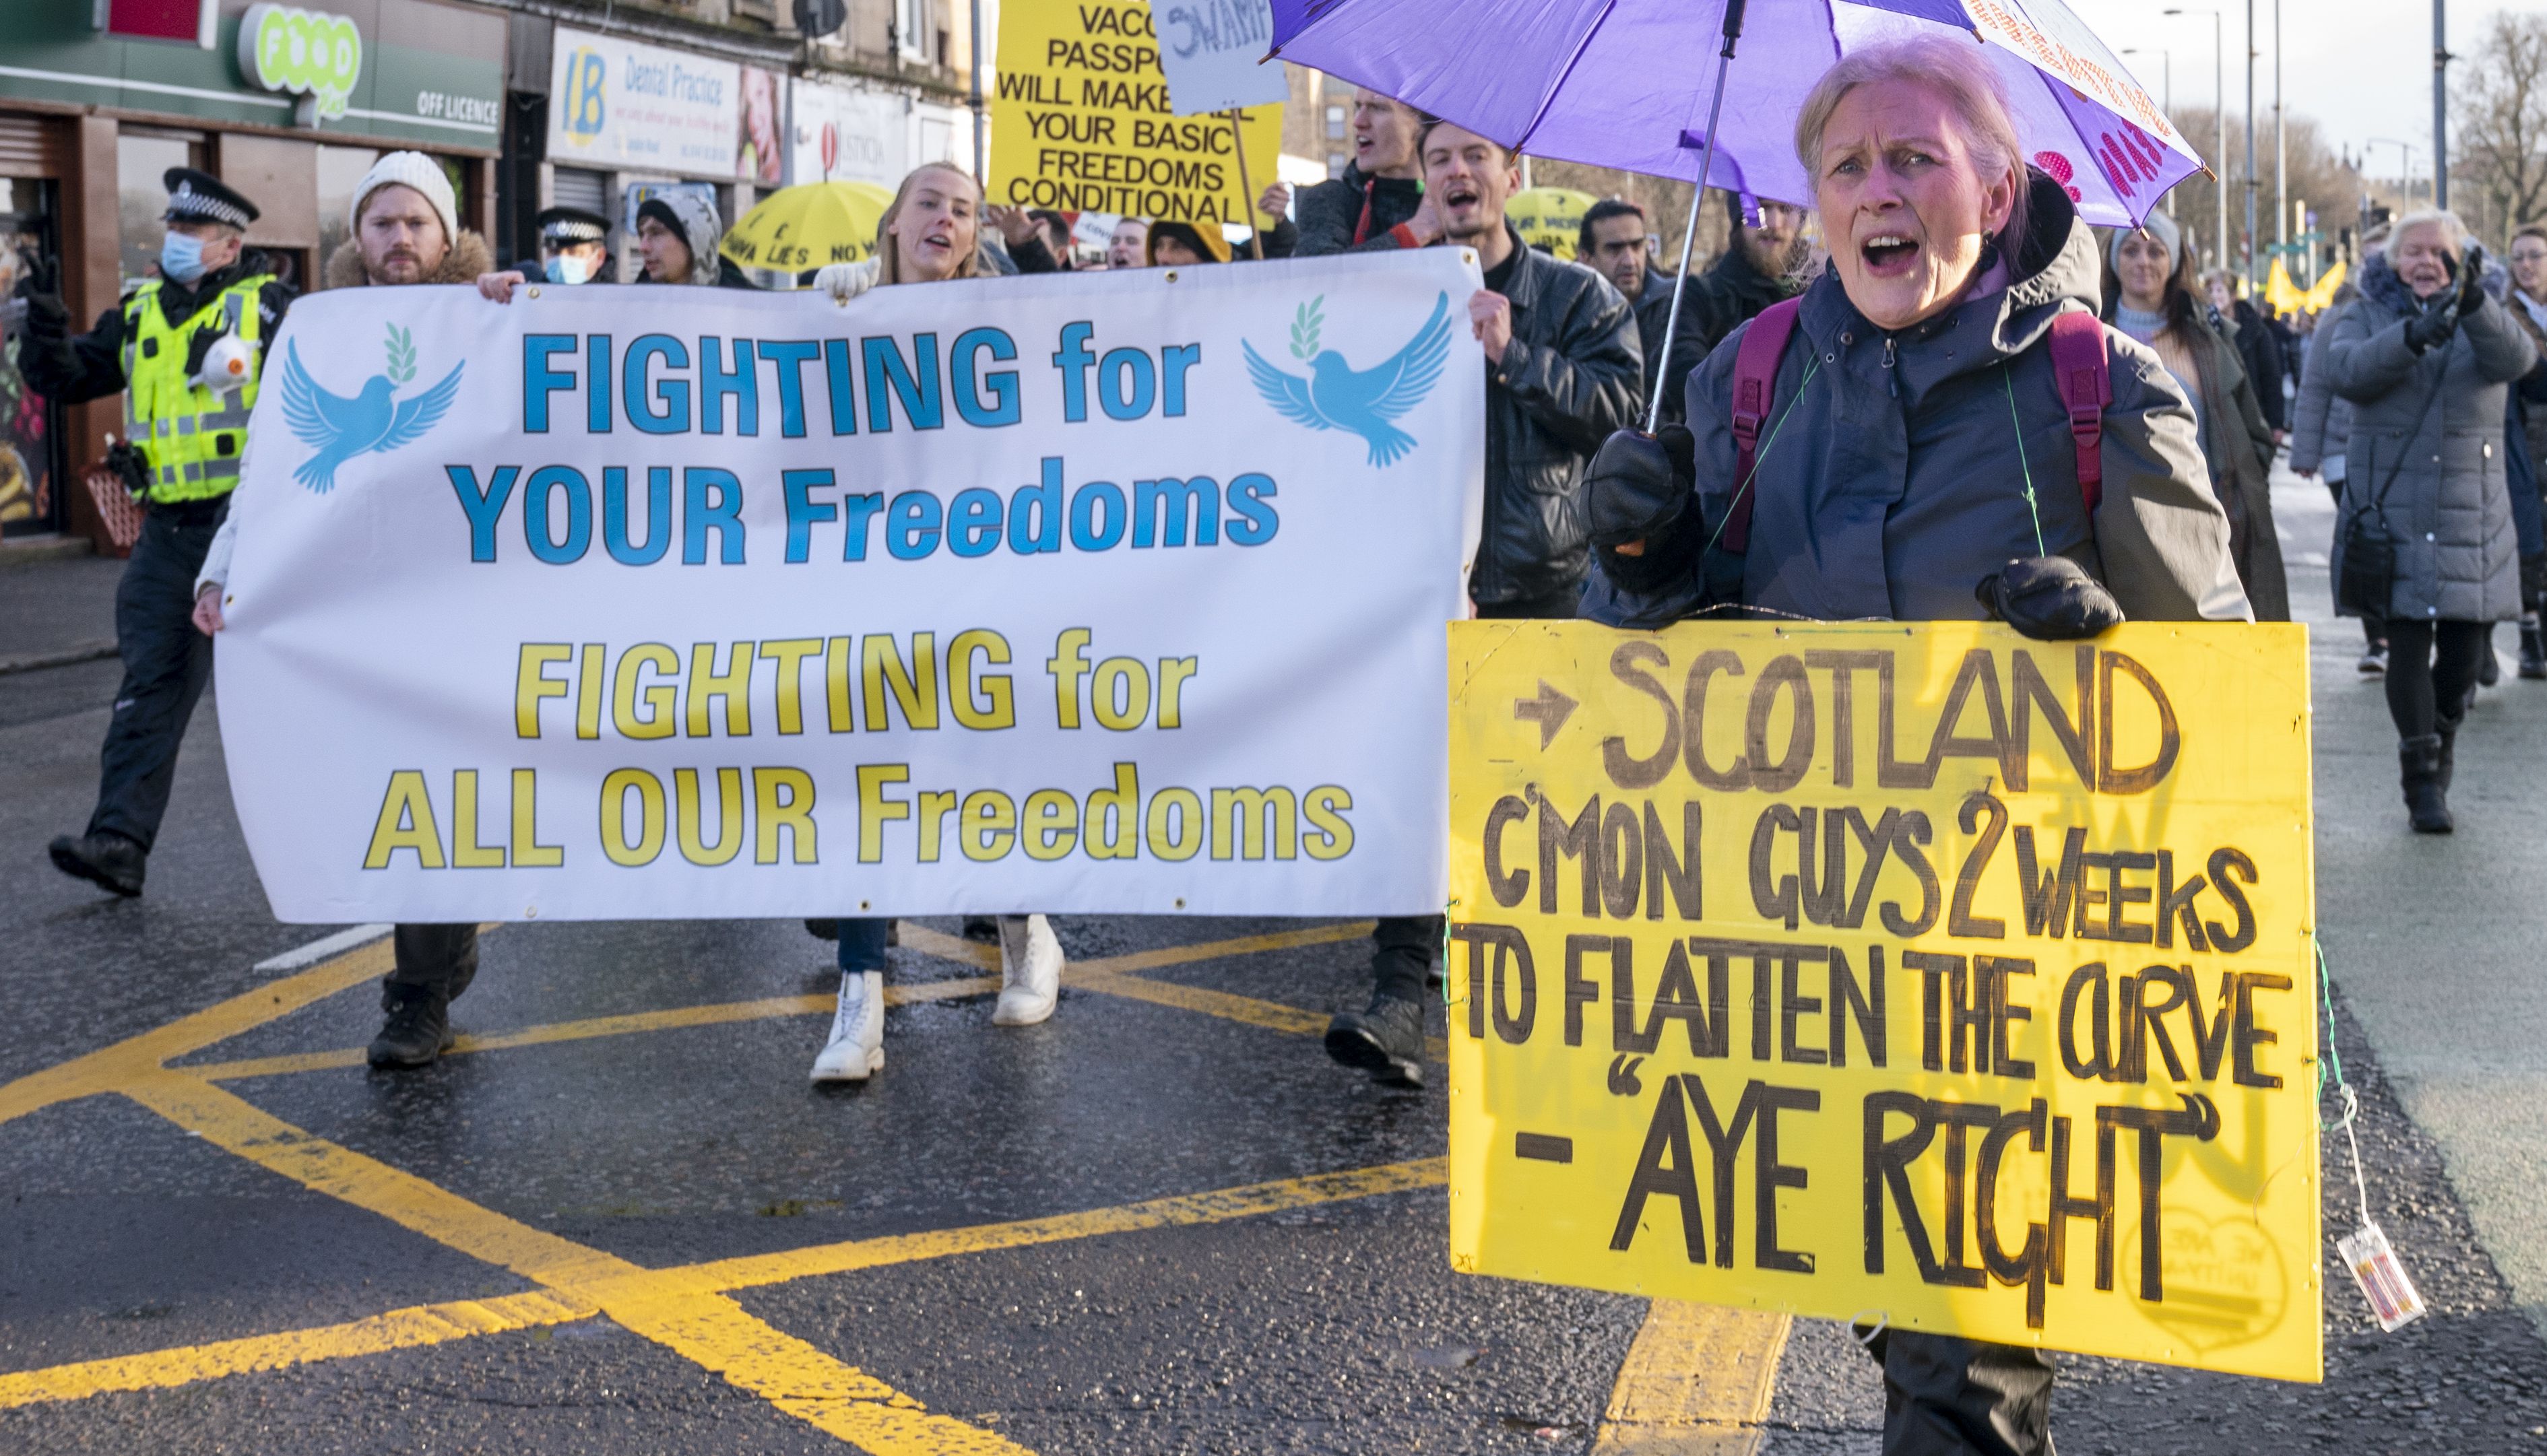 People take part in the %22Freedom Rally%22 an anti-lockdown demonstration organised by the campaign group 'Scotland Against Lockdown' in Glasgow city centre.